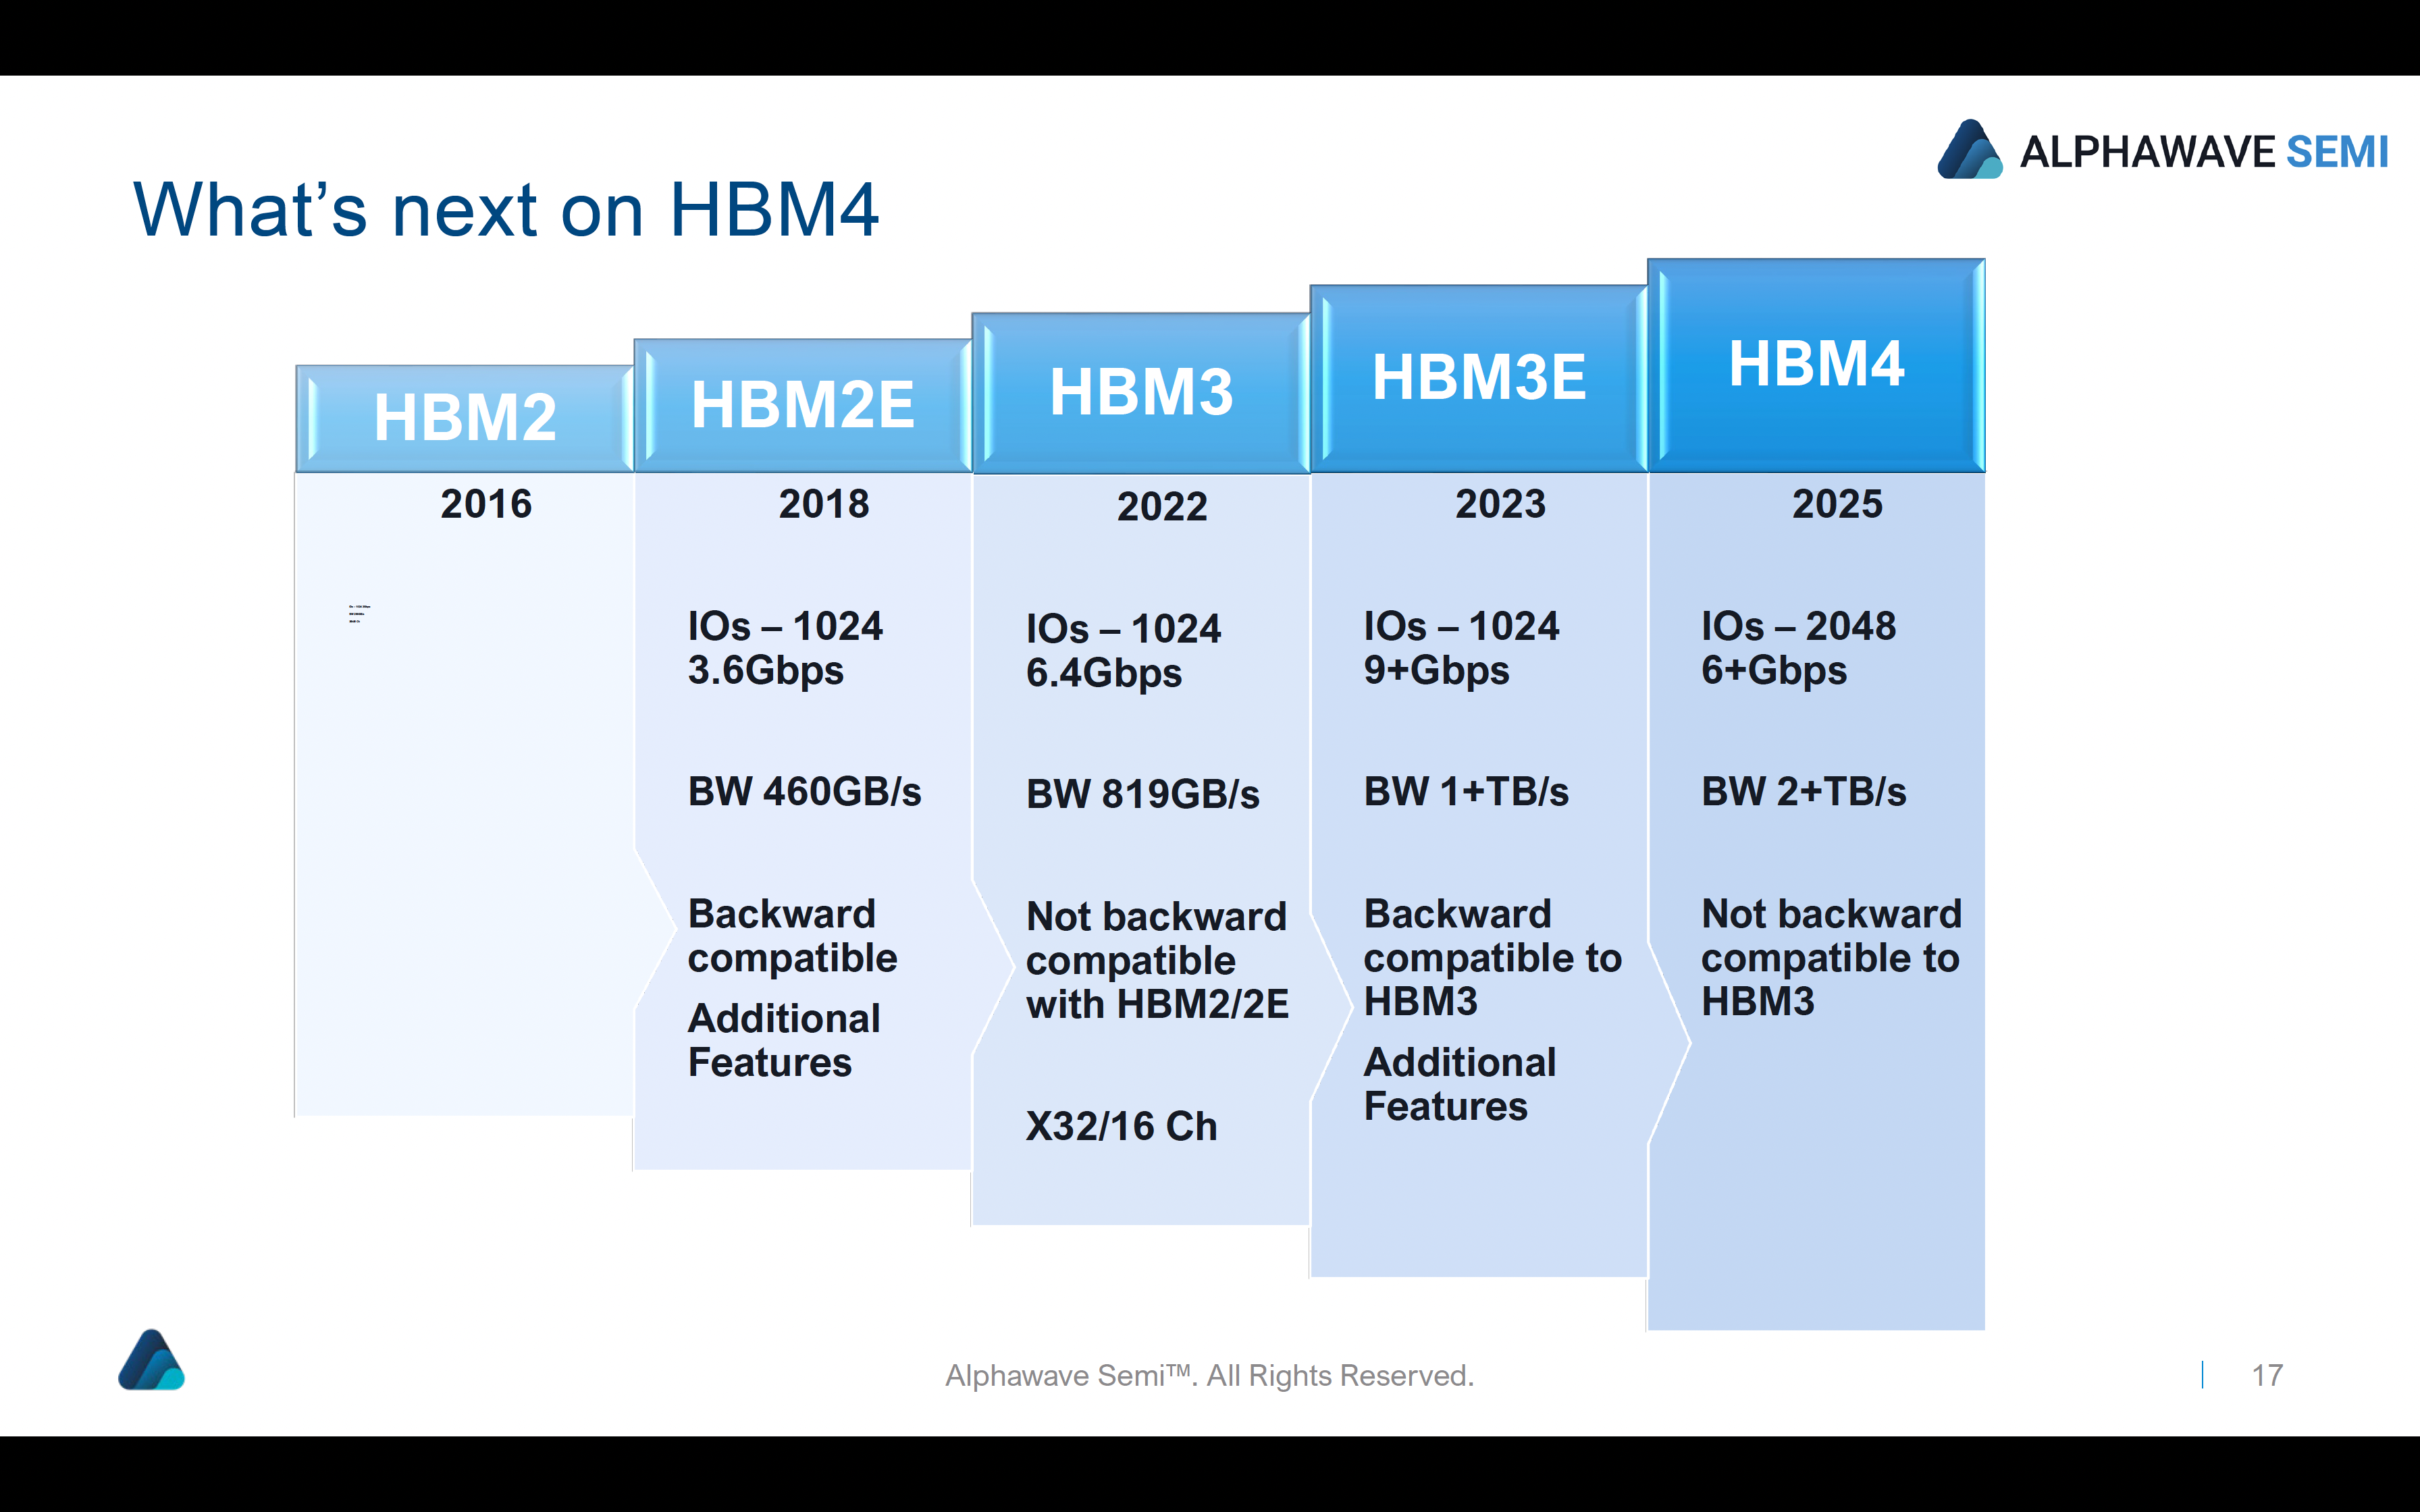 What's Next on HBM4